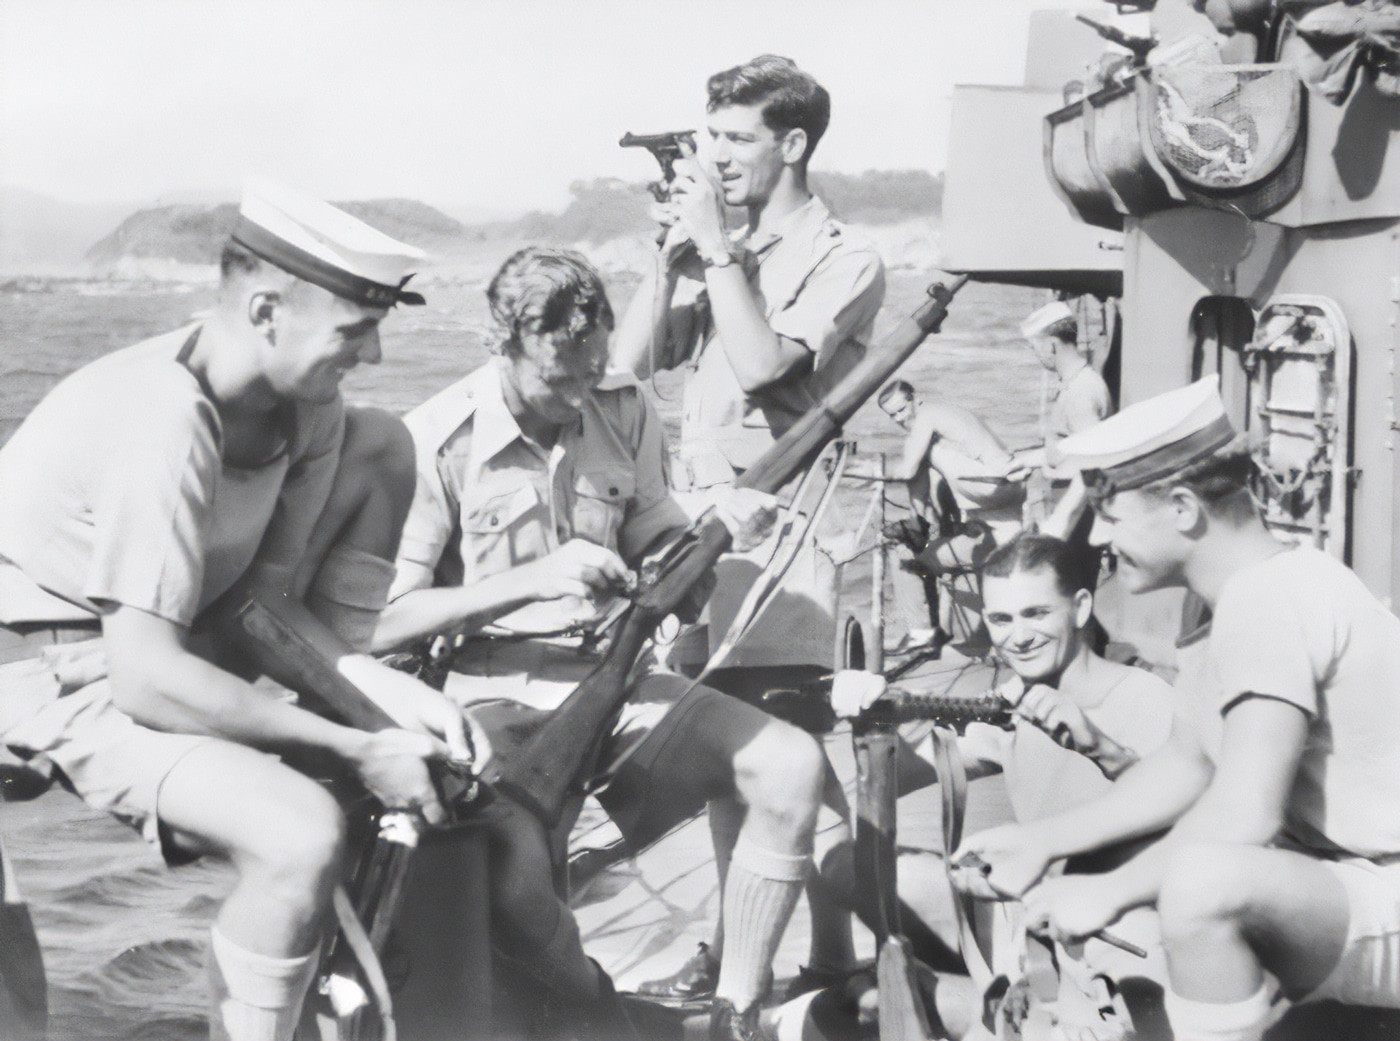 Australian soldiers clean weapons prior to landing in Japan during WWII